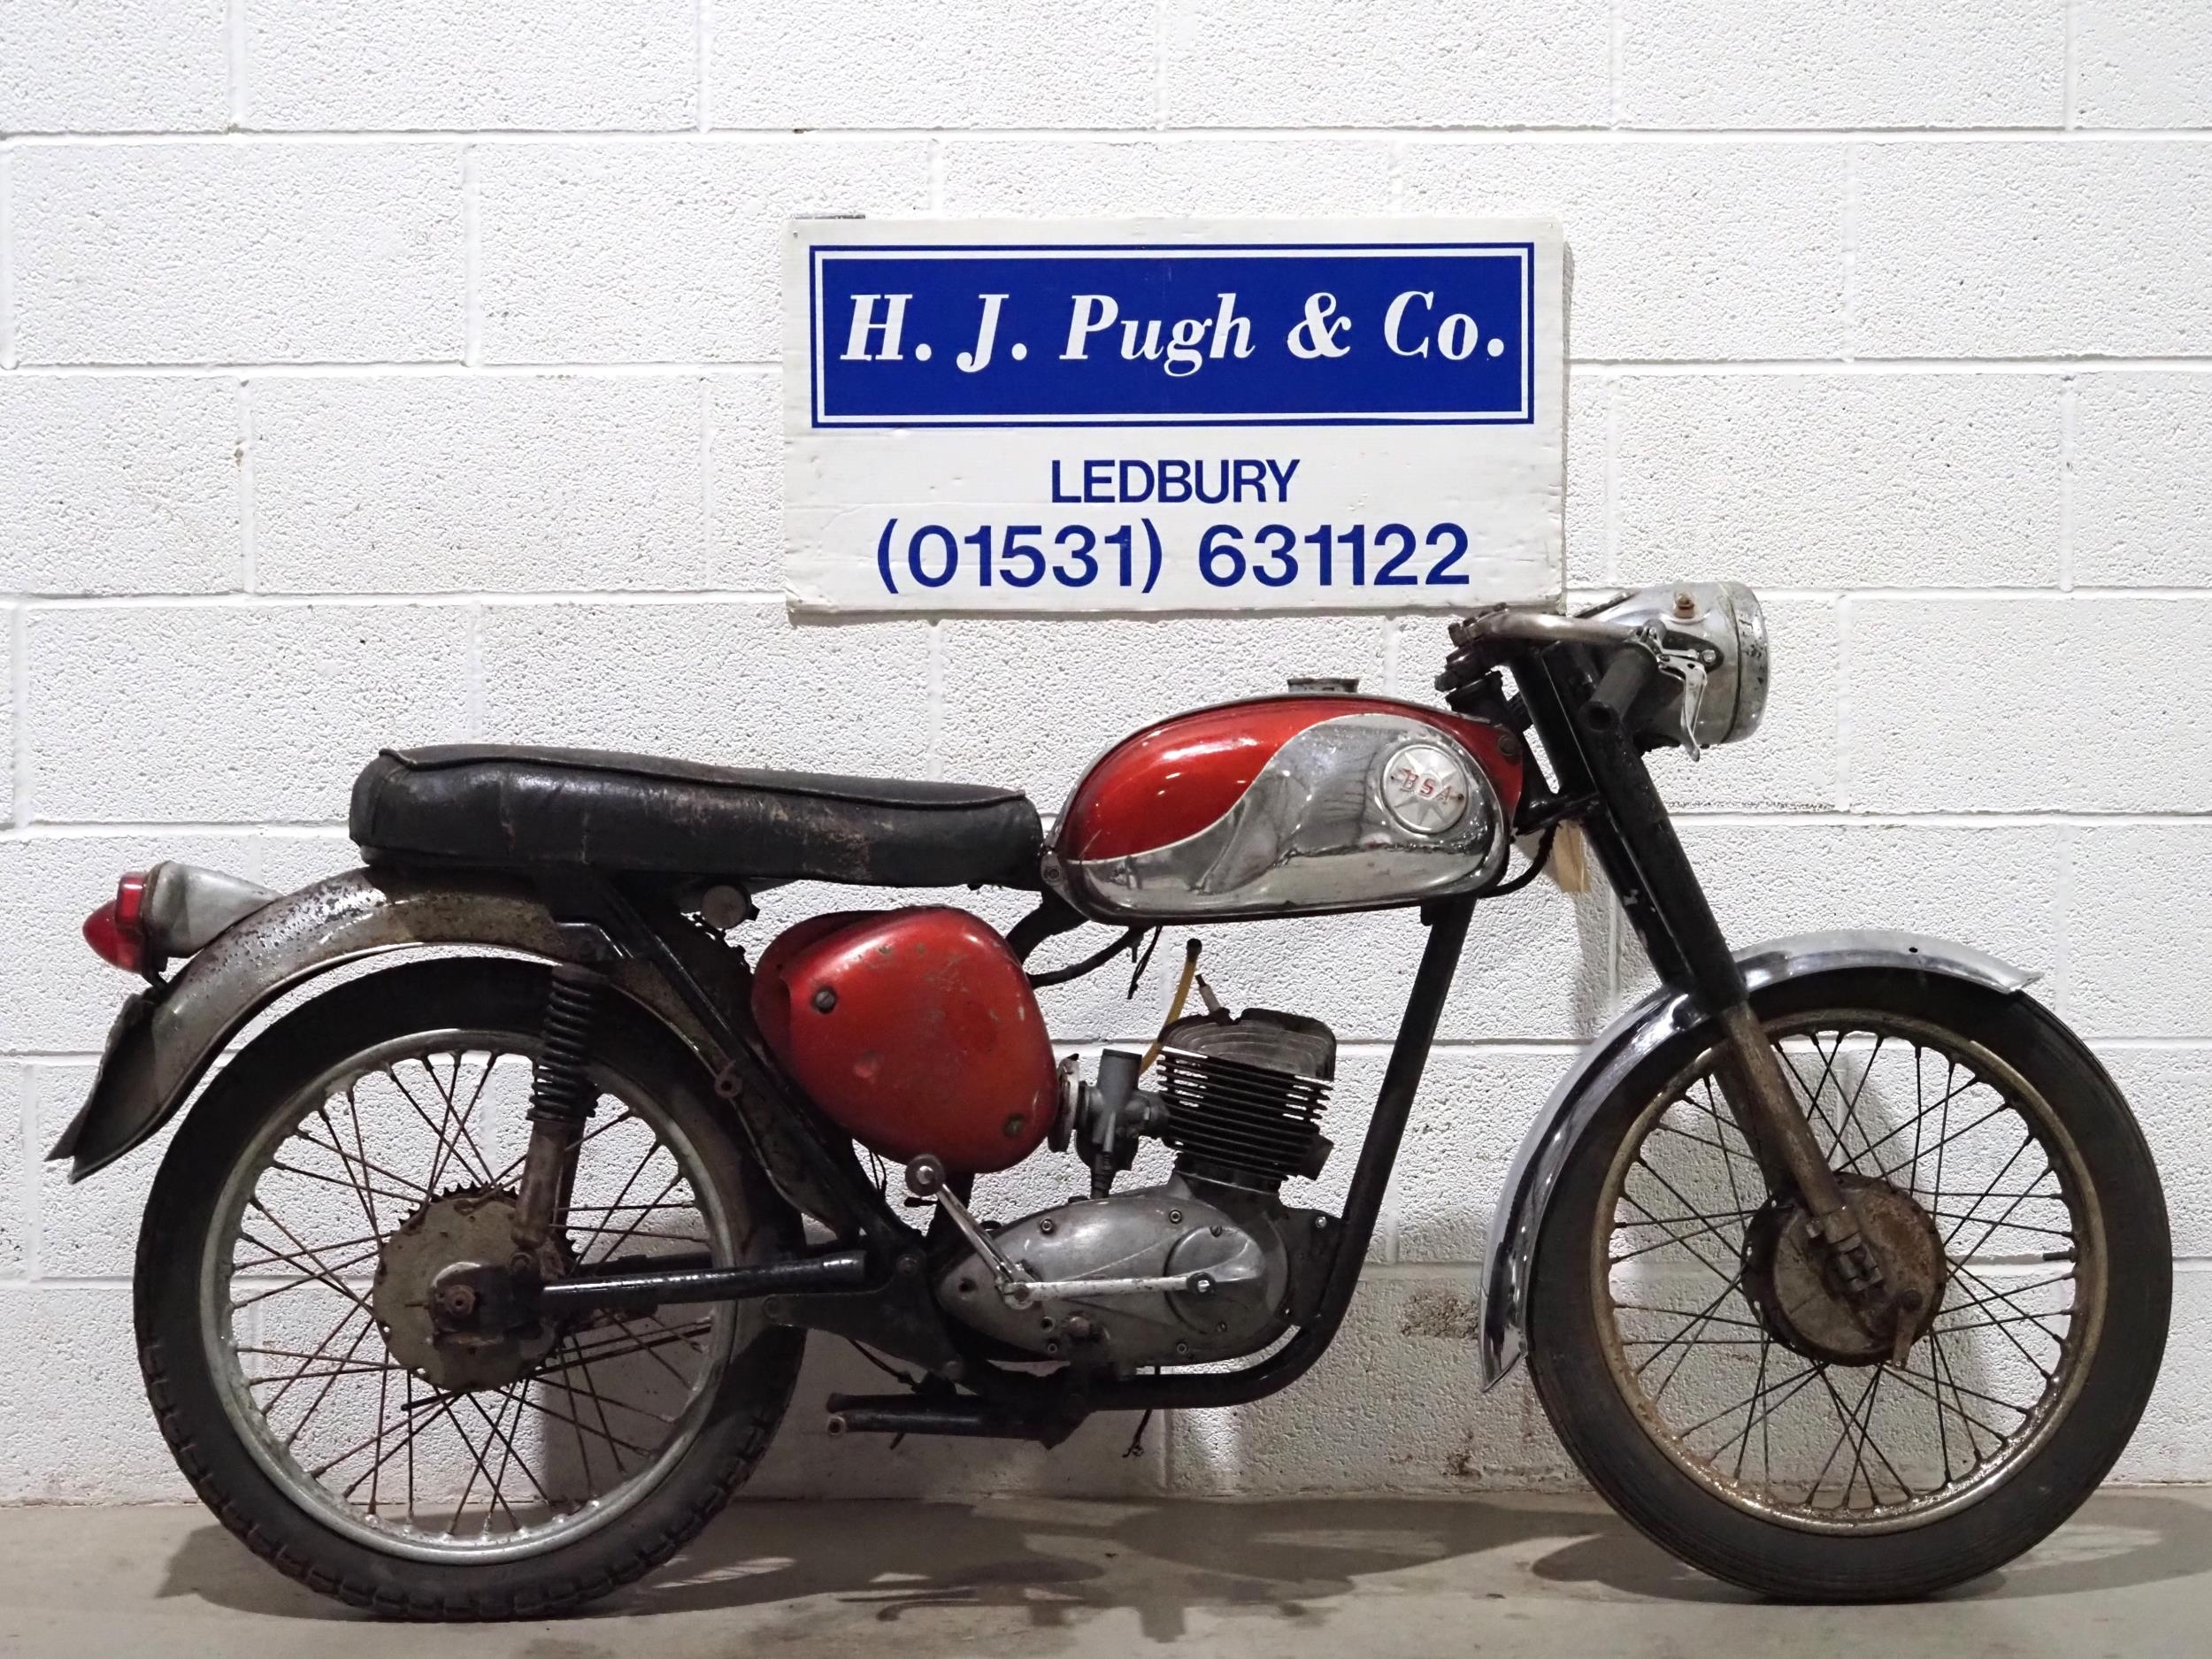 BSA Bantam D10 motorcycle project. 1967. 175cc. Engine turns over with compression. Reg. KHA 419E.